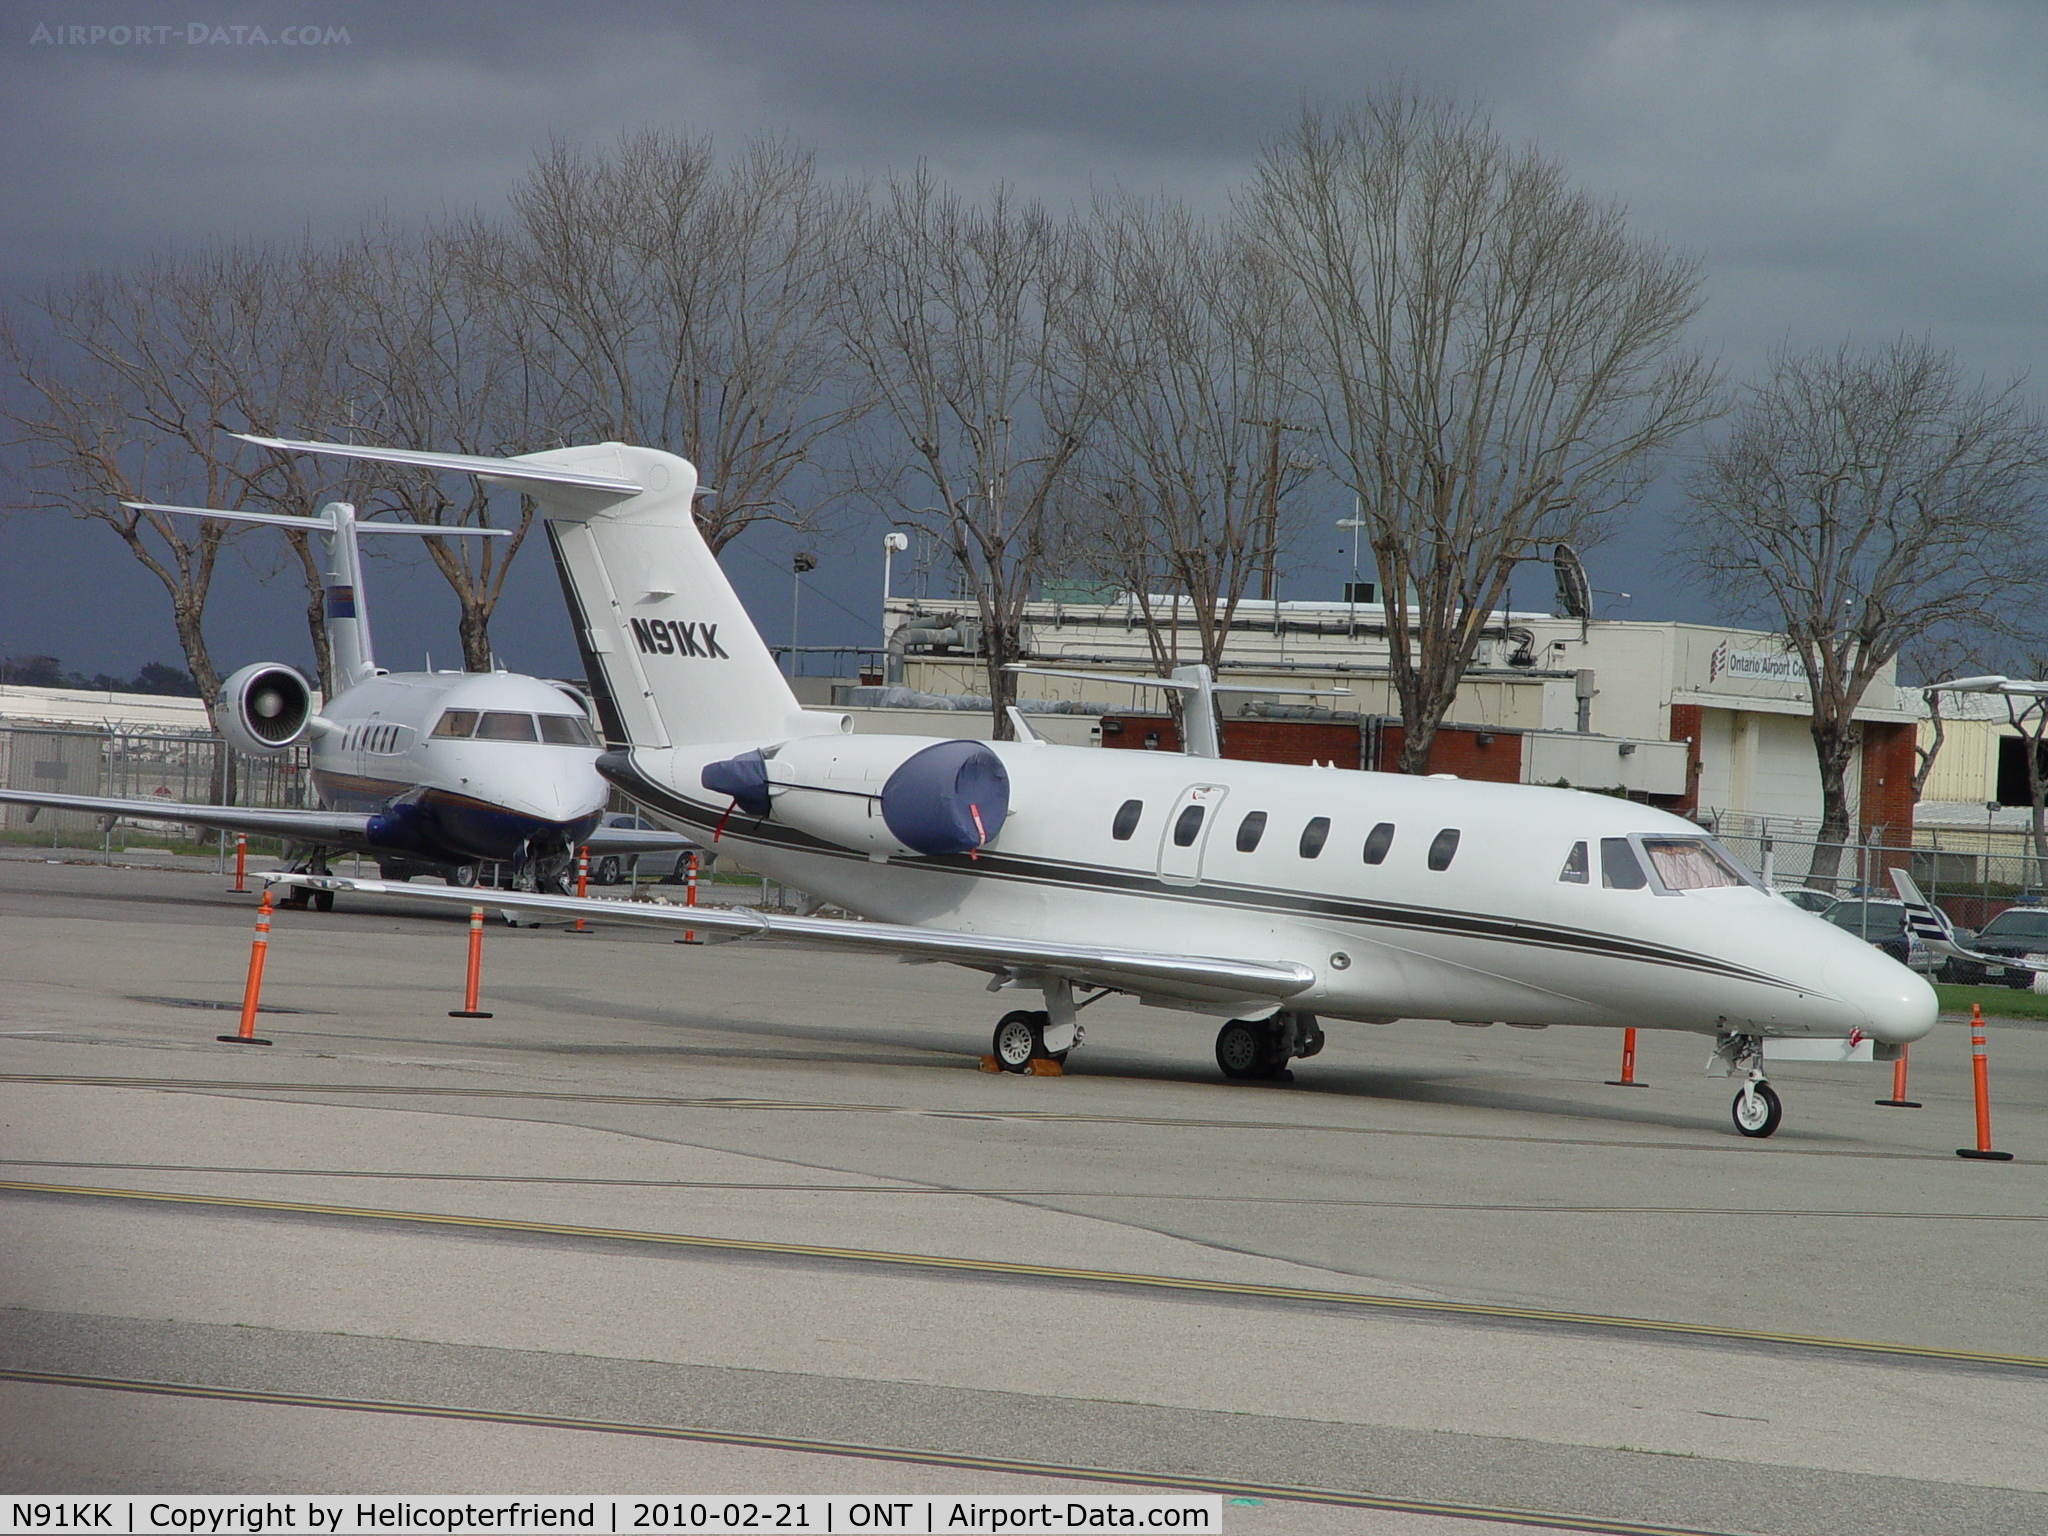 N91KK, 1991 Cessna 650 Citation III C/N 650-0193, Parked, covered, and waiting